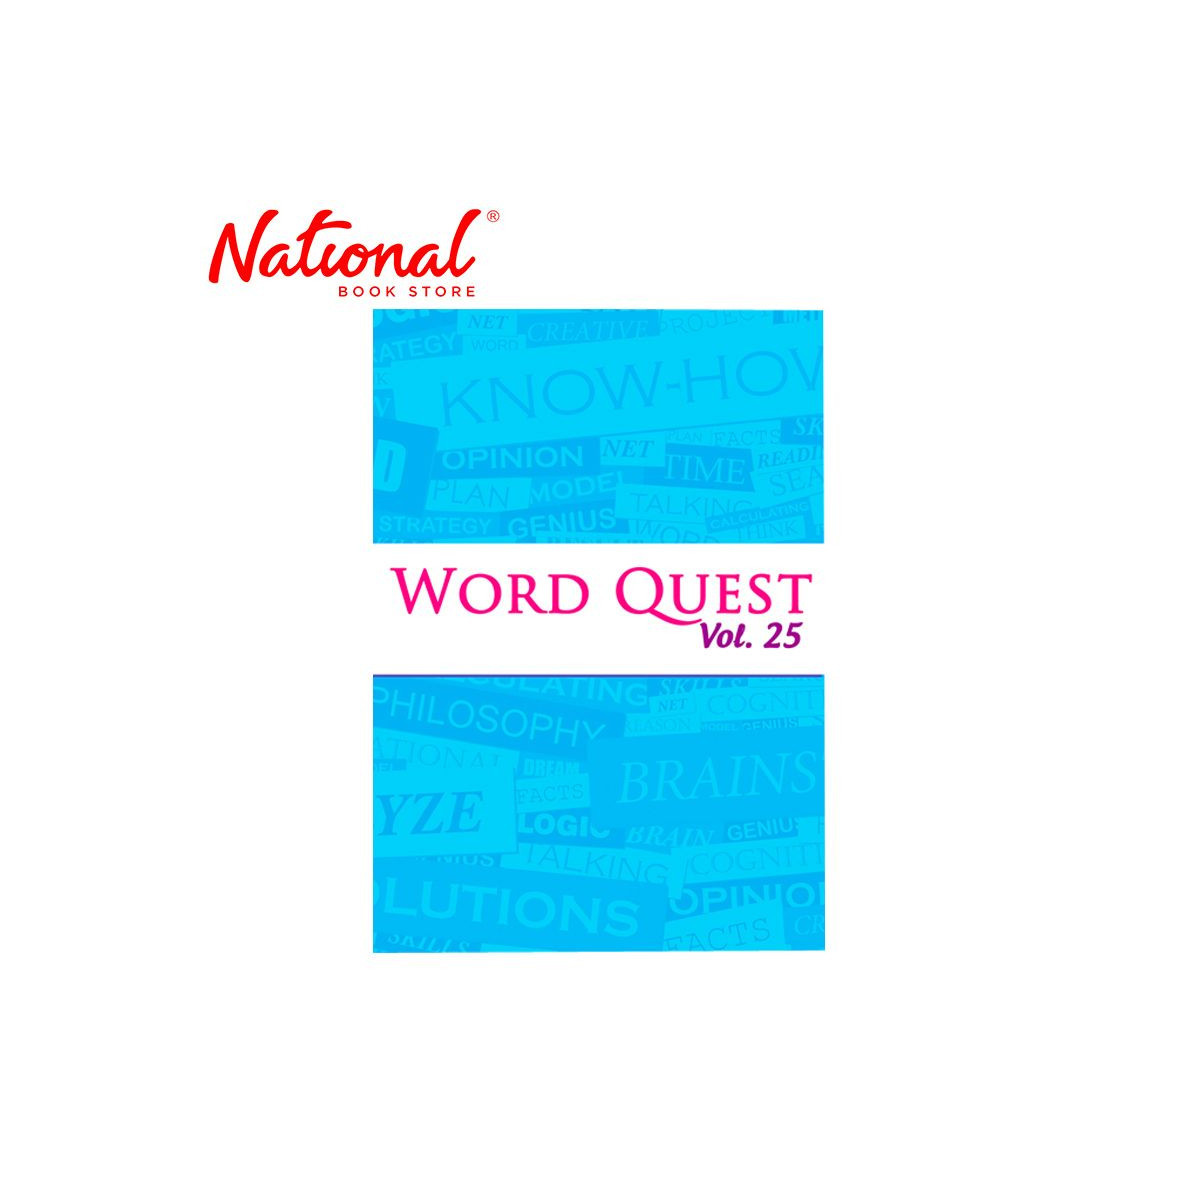 Word Quest Volume 25 Trade Paperback - Puzzle Games